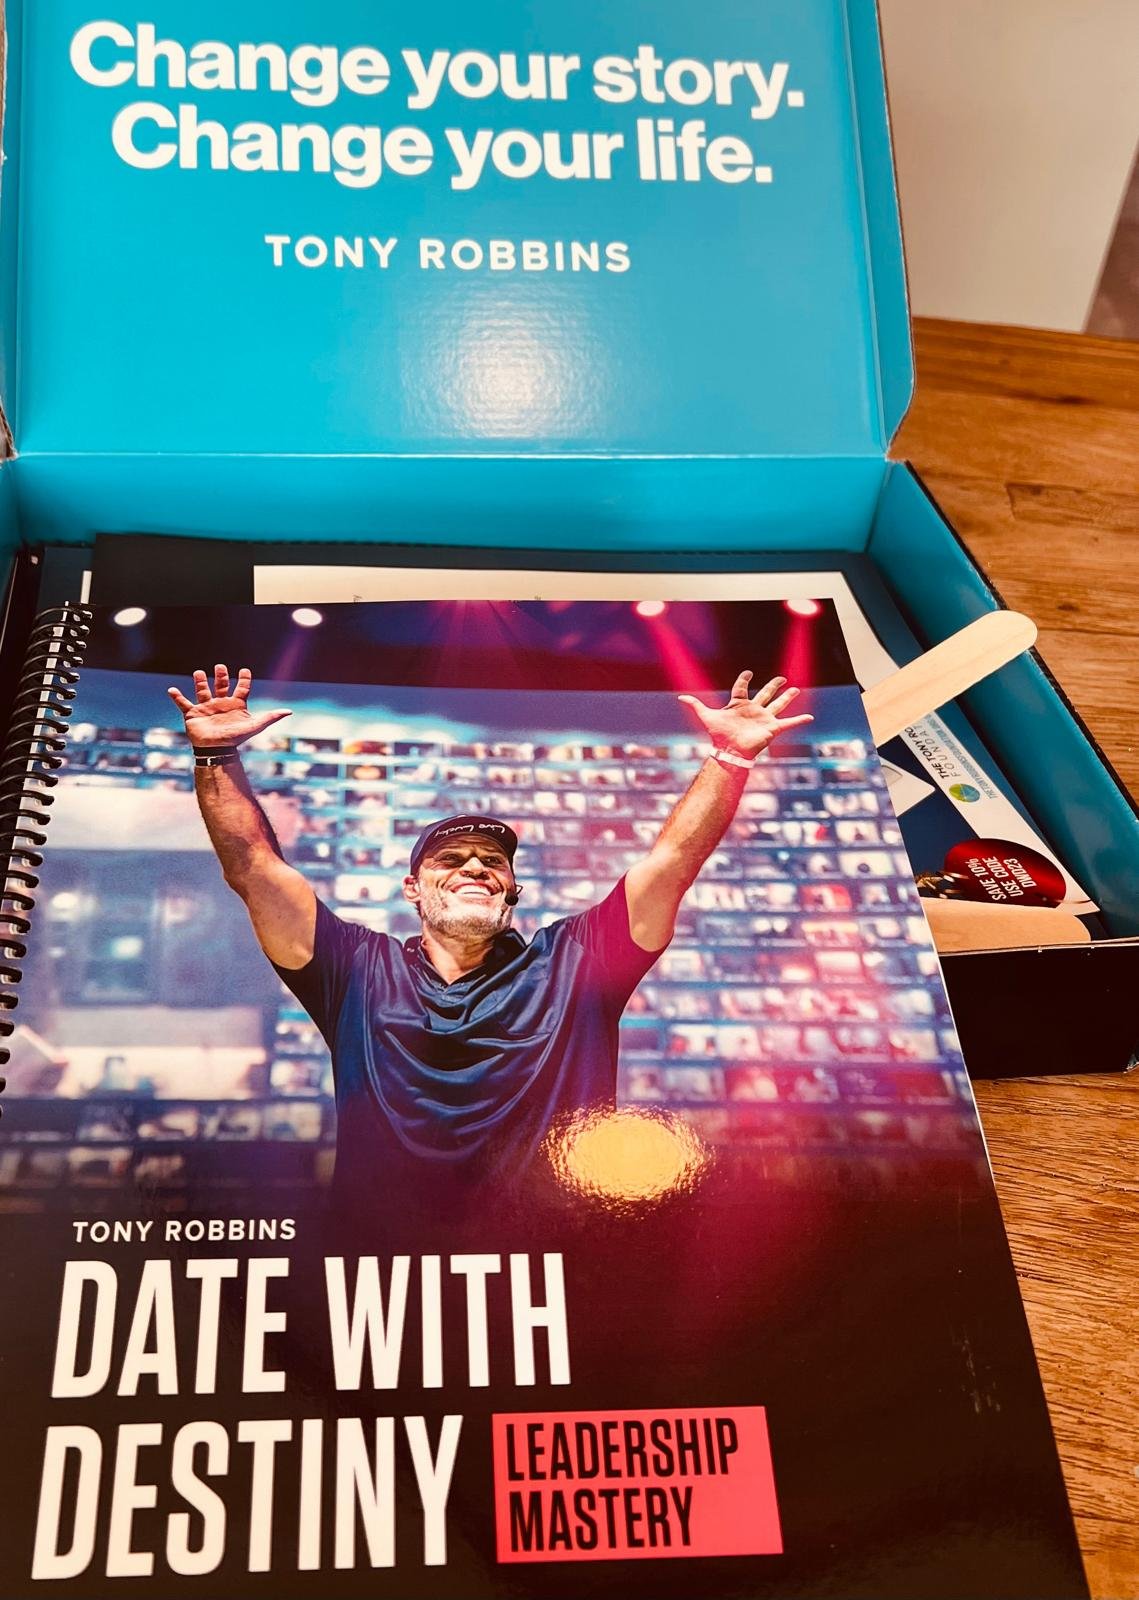 100 Lessons from Tony Robbins' Date With Destiny (DWD) — CXIA Group